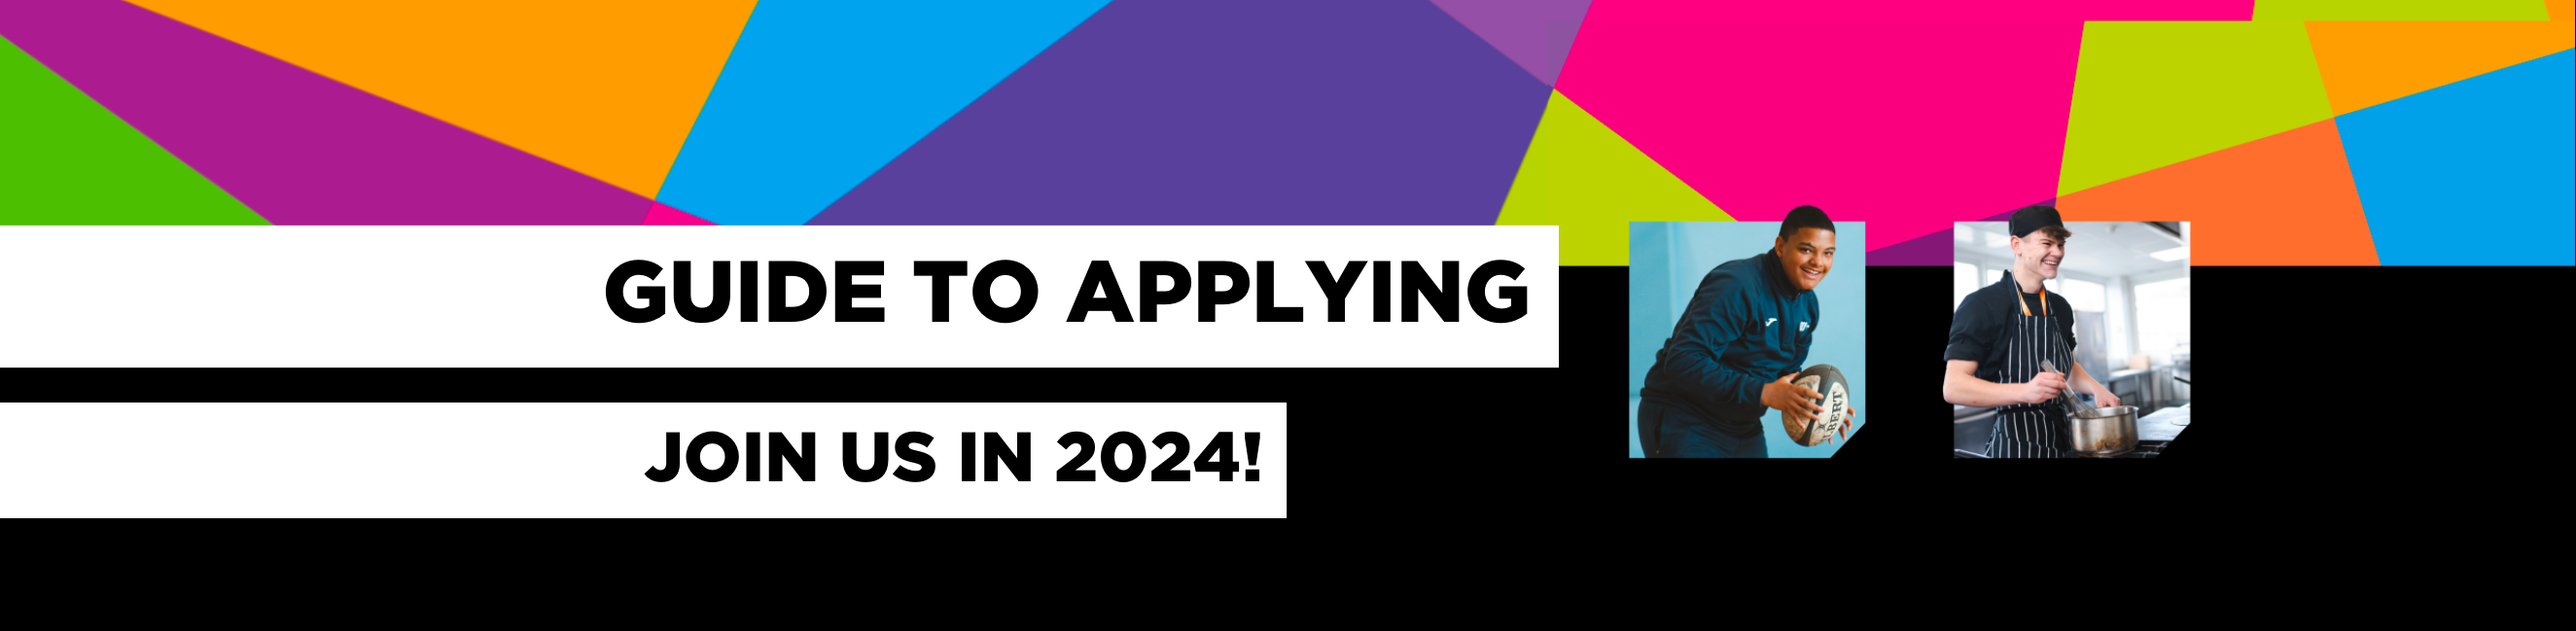 Guide to applying - Join us in 2024